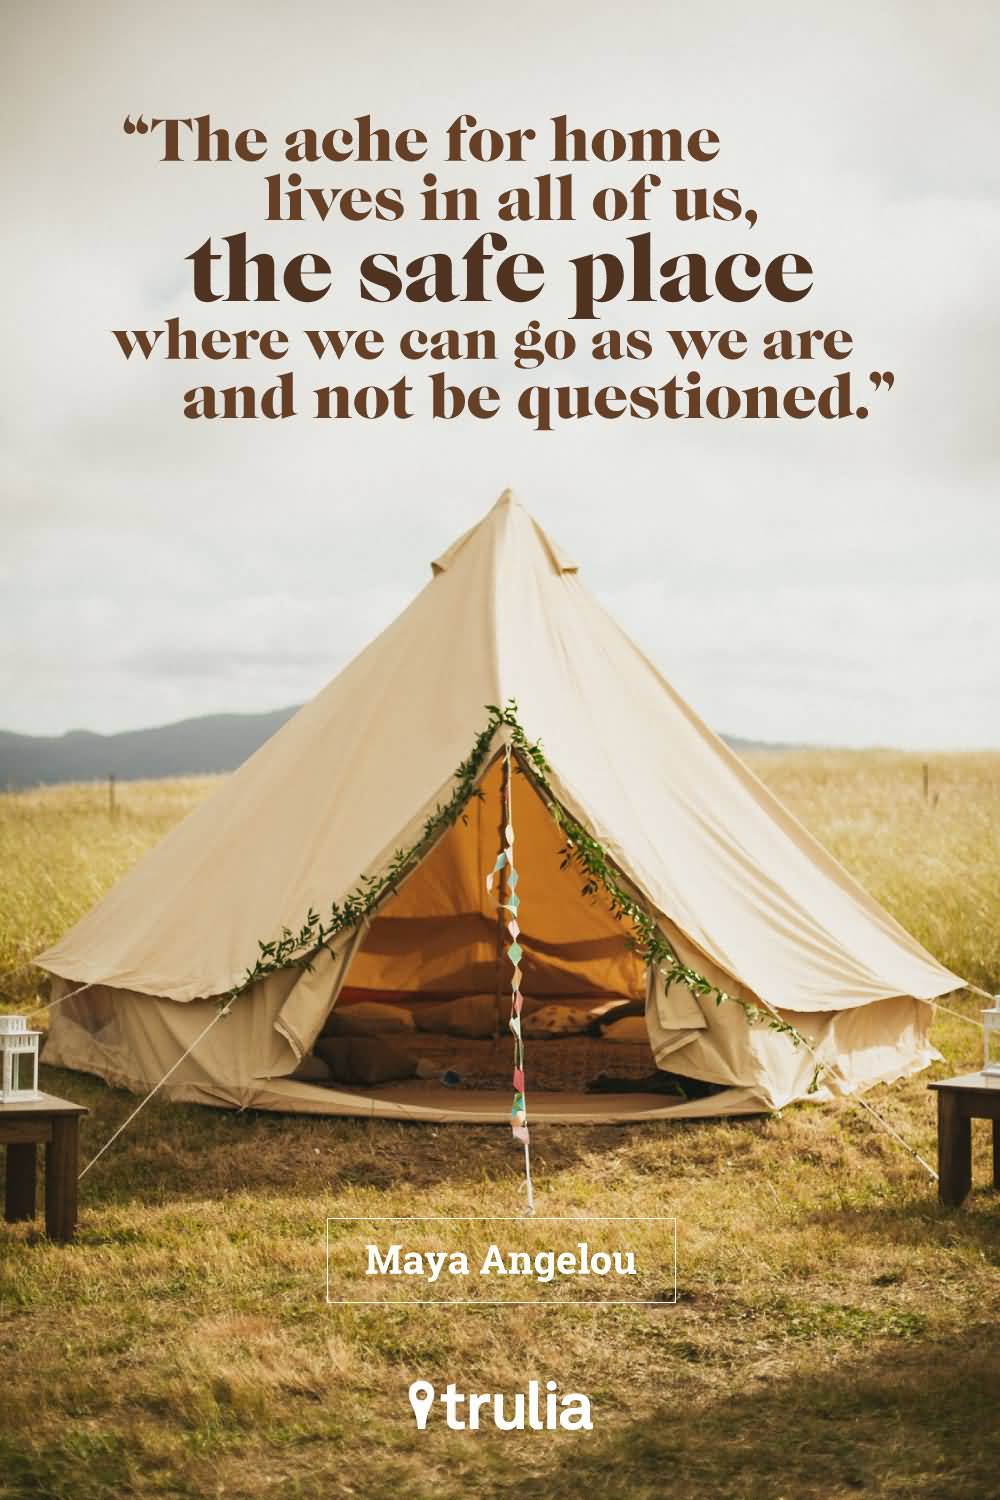 The ache for home lives in all of us, the safe place where we can go as we are and not be questioned.